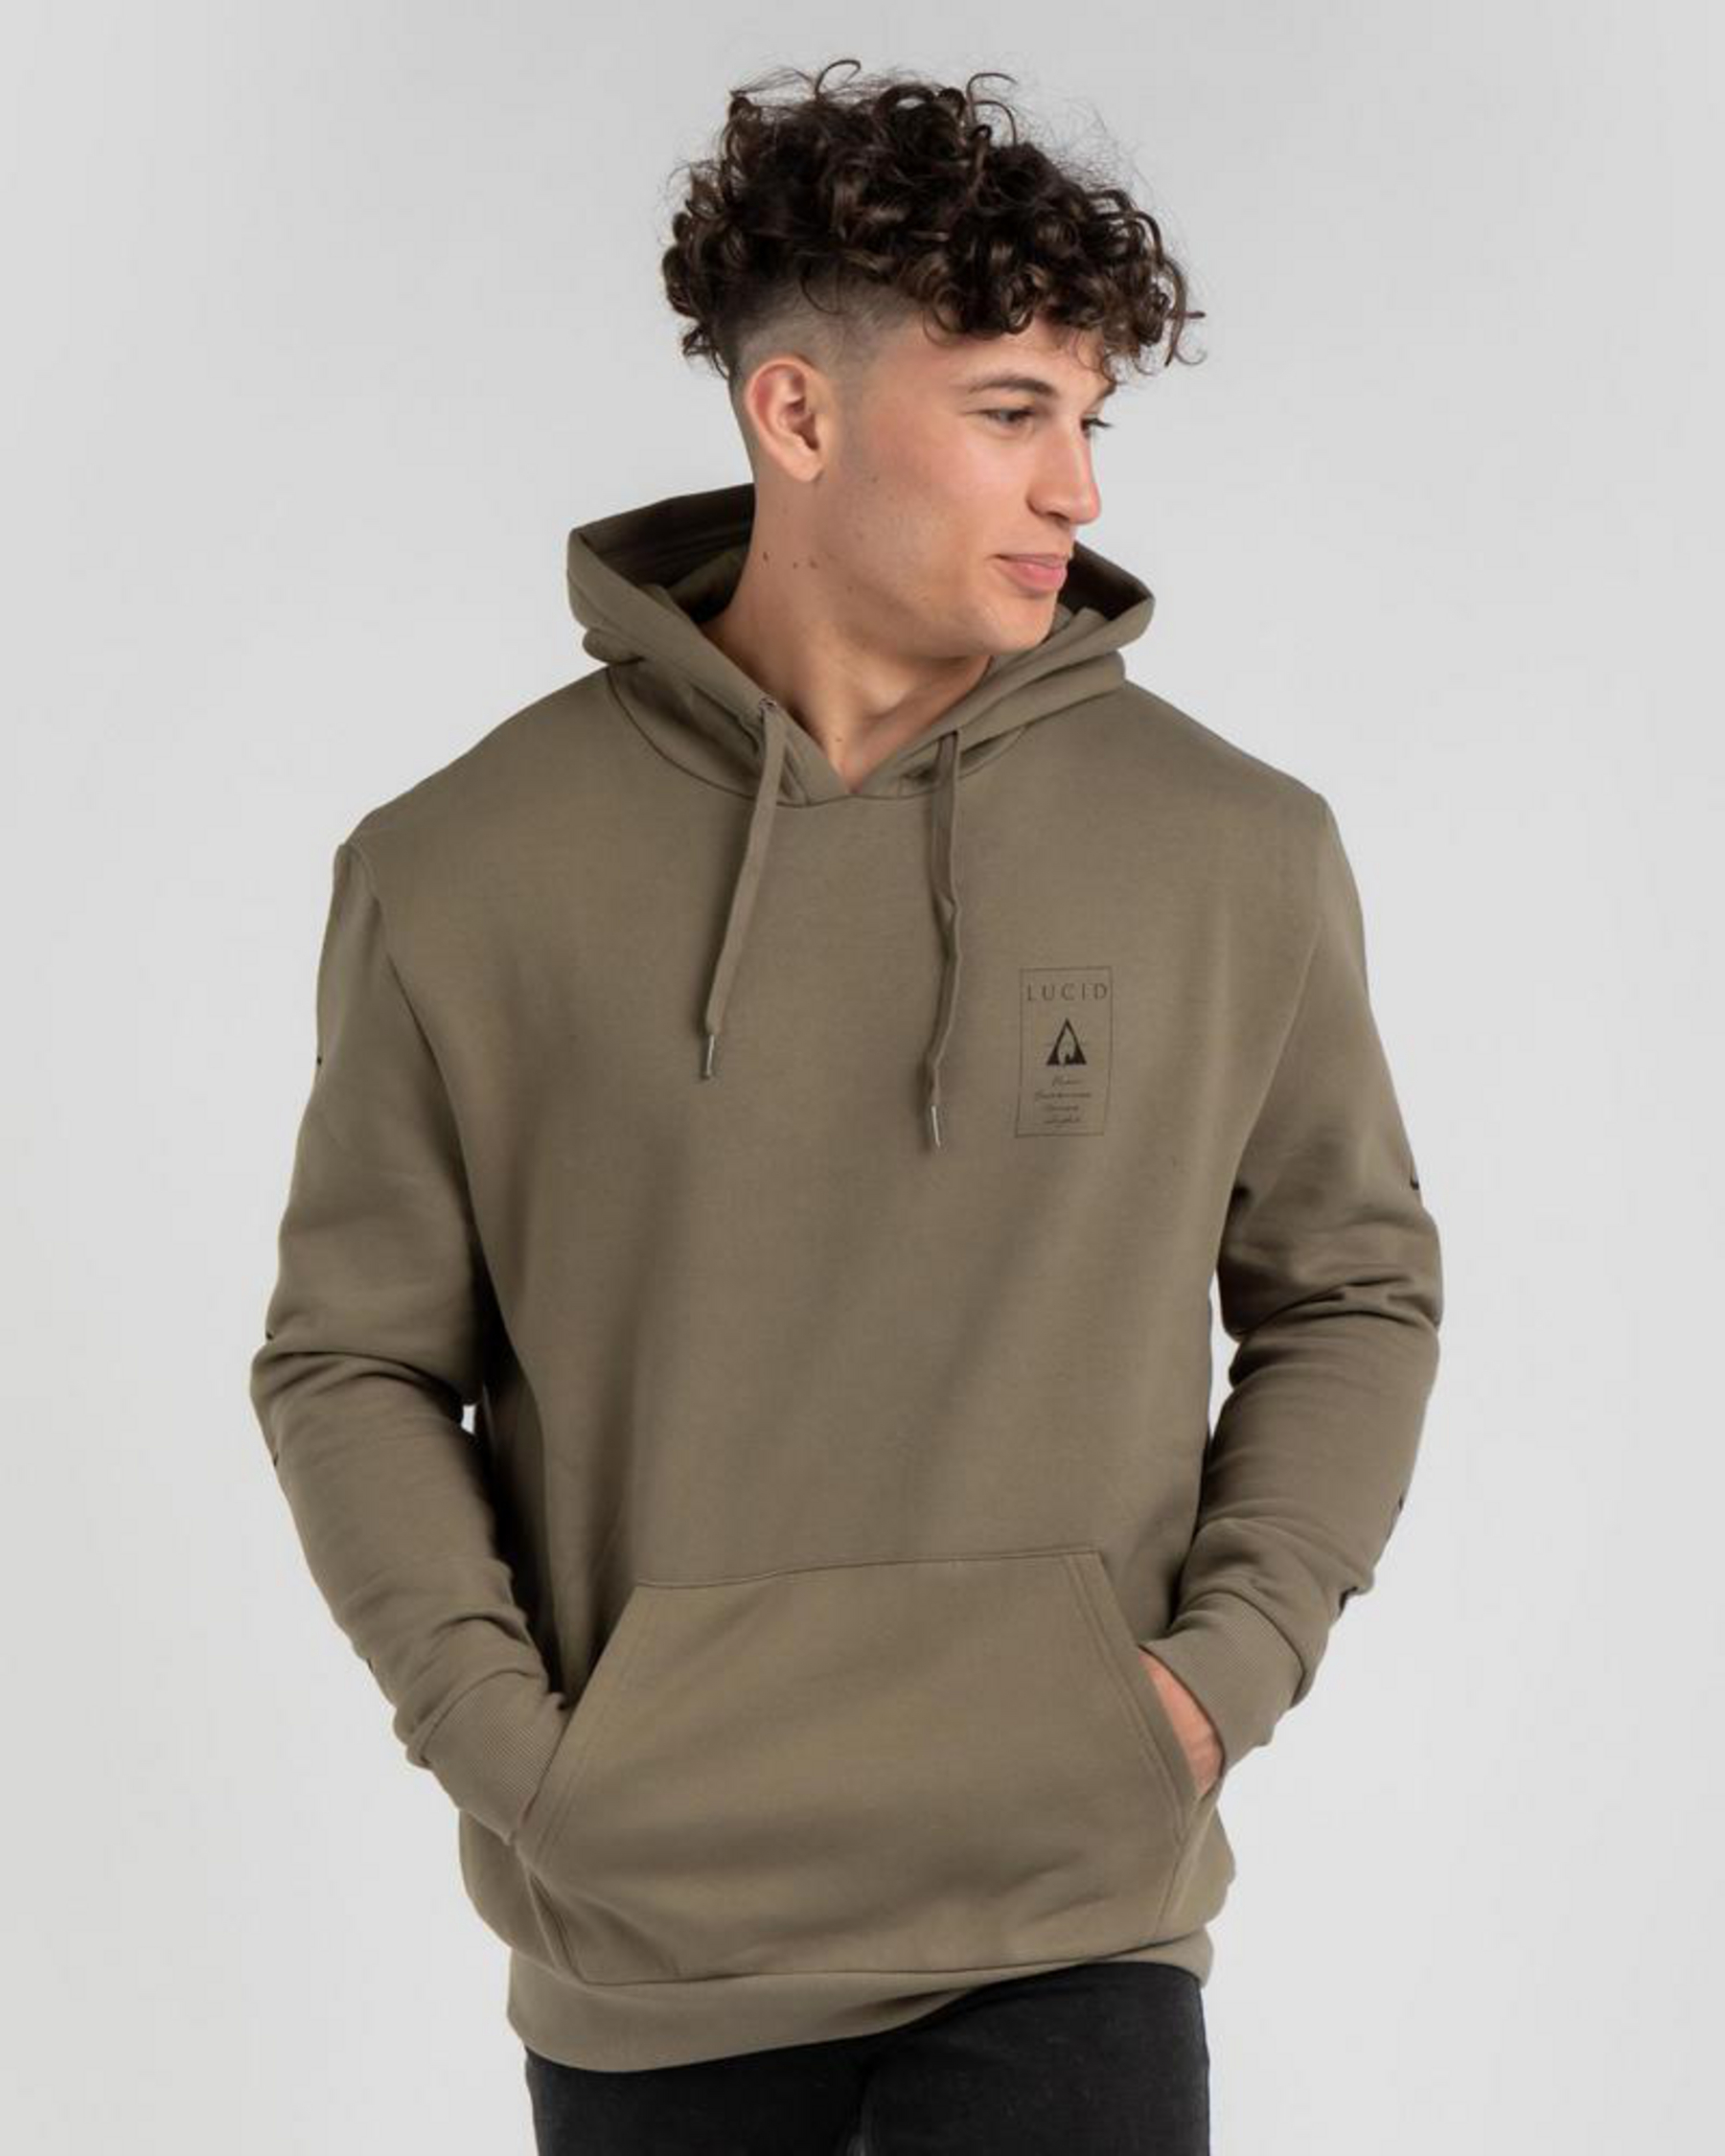 Lucid Cryptic Hoodie In Olive - FREE* Shipping & Easy Returns - City ...